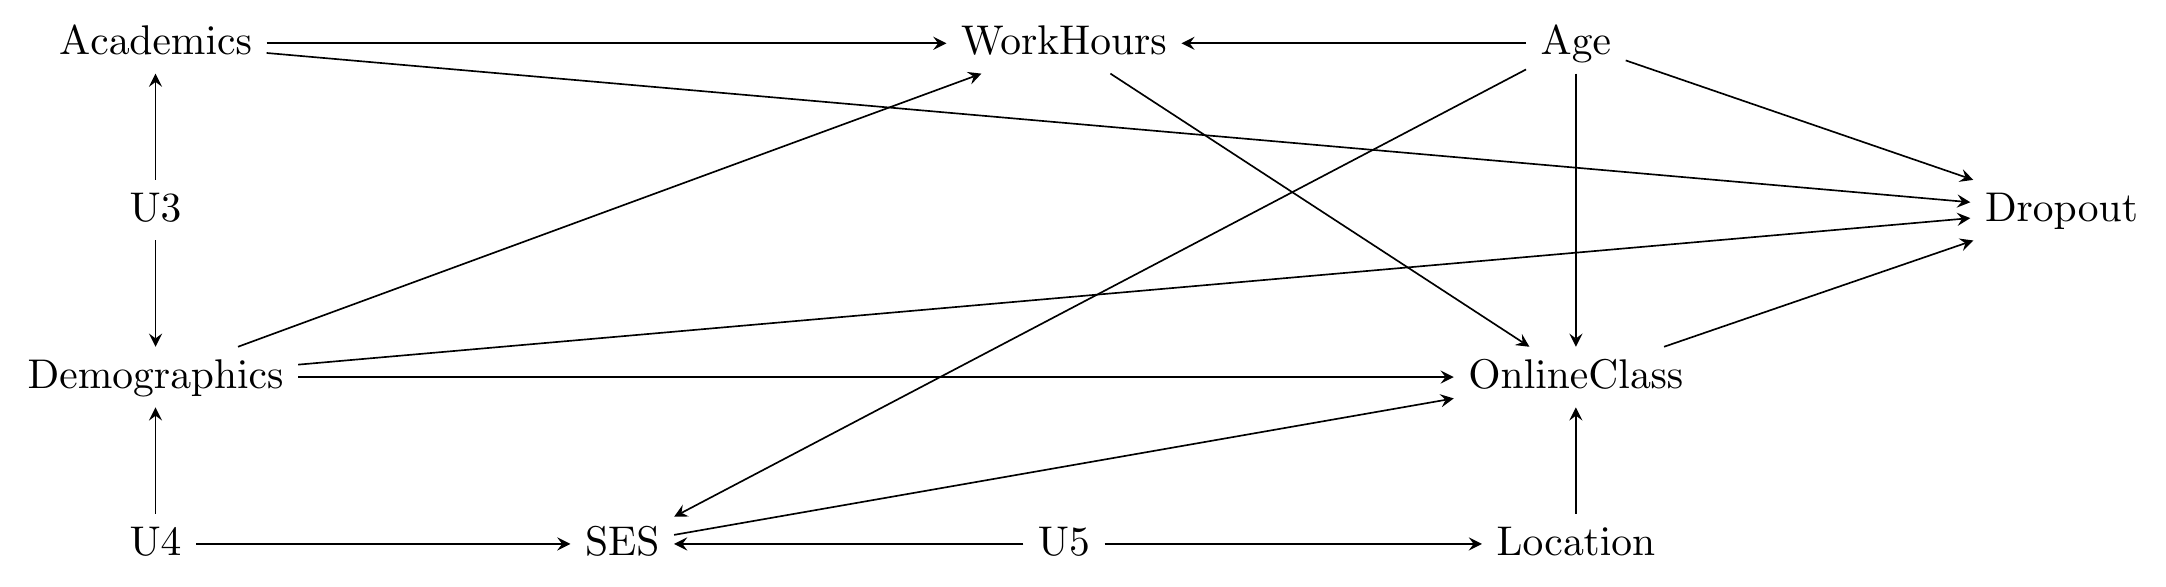 A causal diagram in which Dropout is caused by Academics, Demographics, Age, and Online Class. Academics and Demographics share the joint cause U1. Online Class is caused by Work Hours, Age, SES, and Location. Location is caused by U1 which is caused by SES, which is caused by Age. Work Hours is caused by Academics, Demographics, and Age. Demographics and SES have shared cause U2.